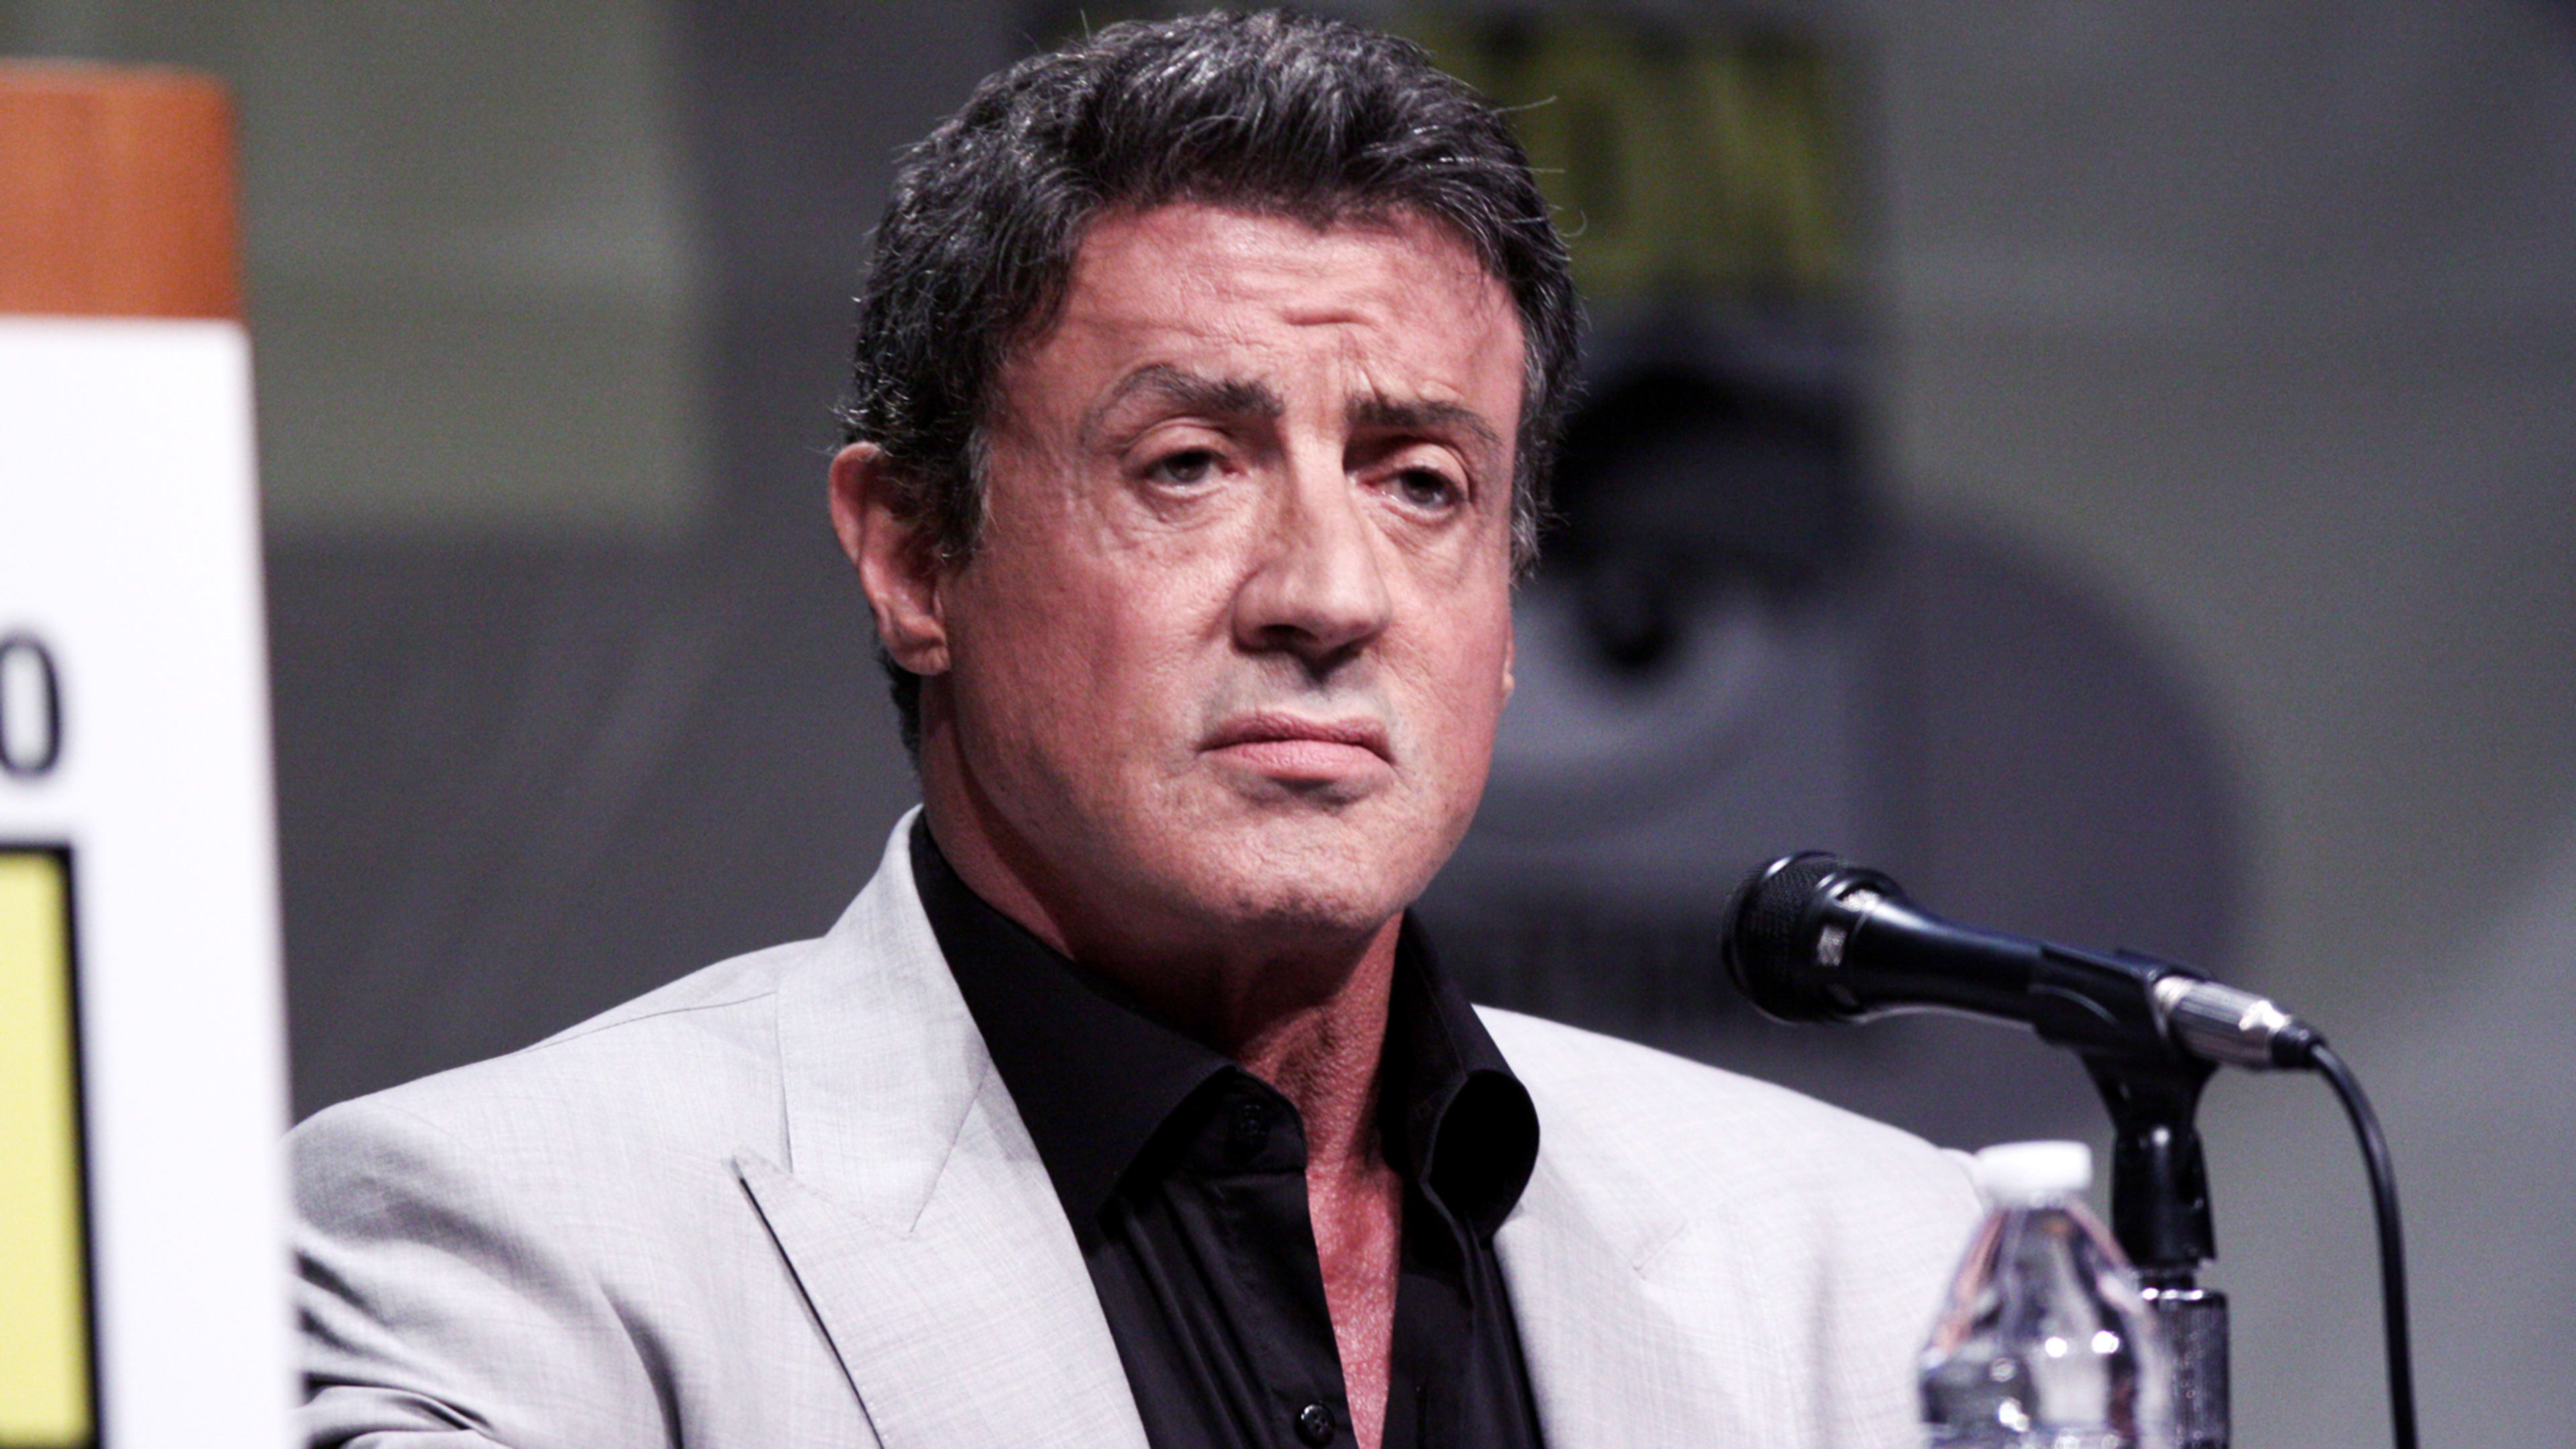 Sylvester Stallone is under investigation for alleged sex crimes